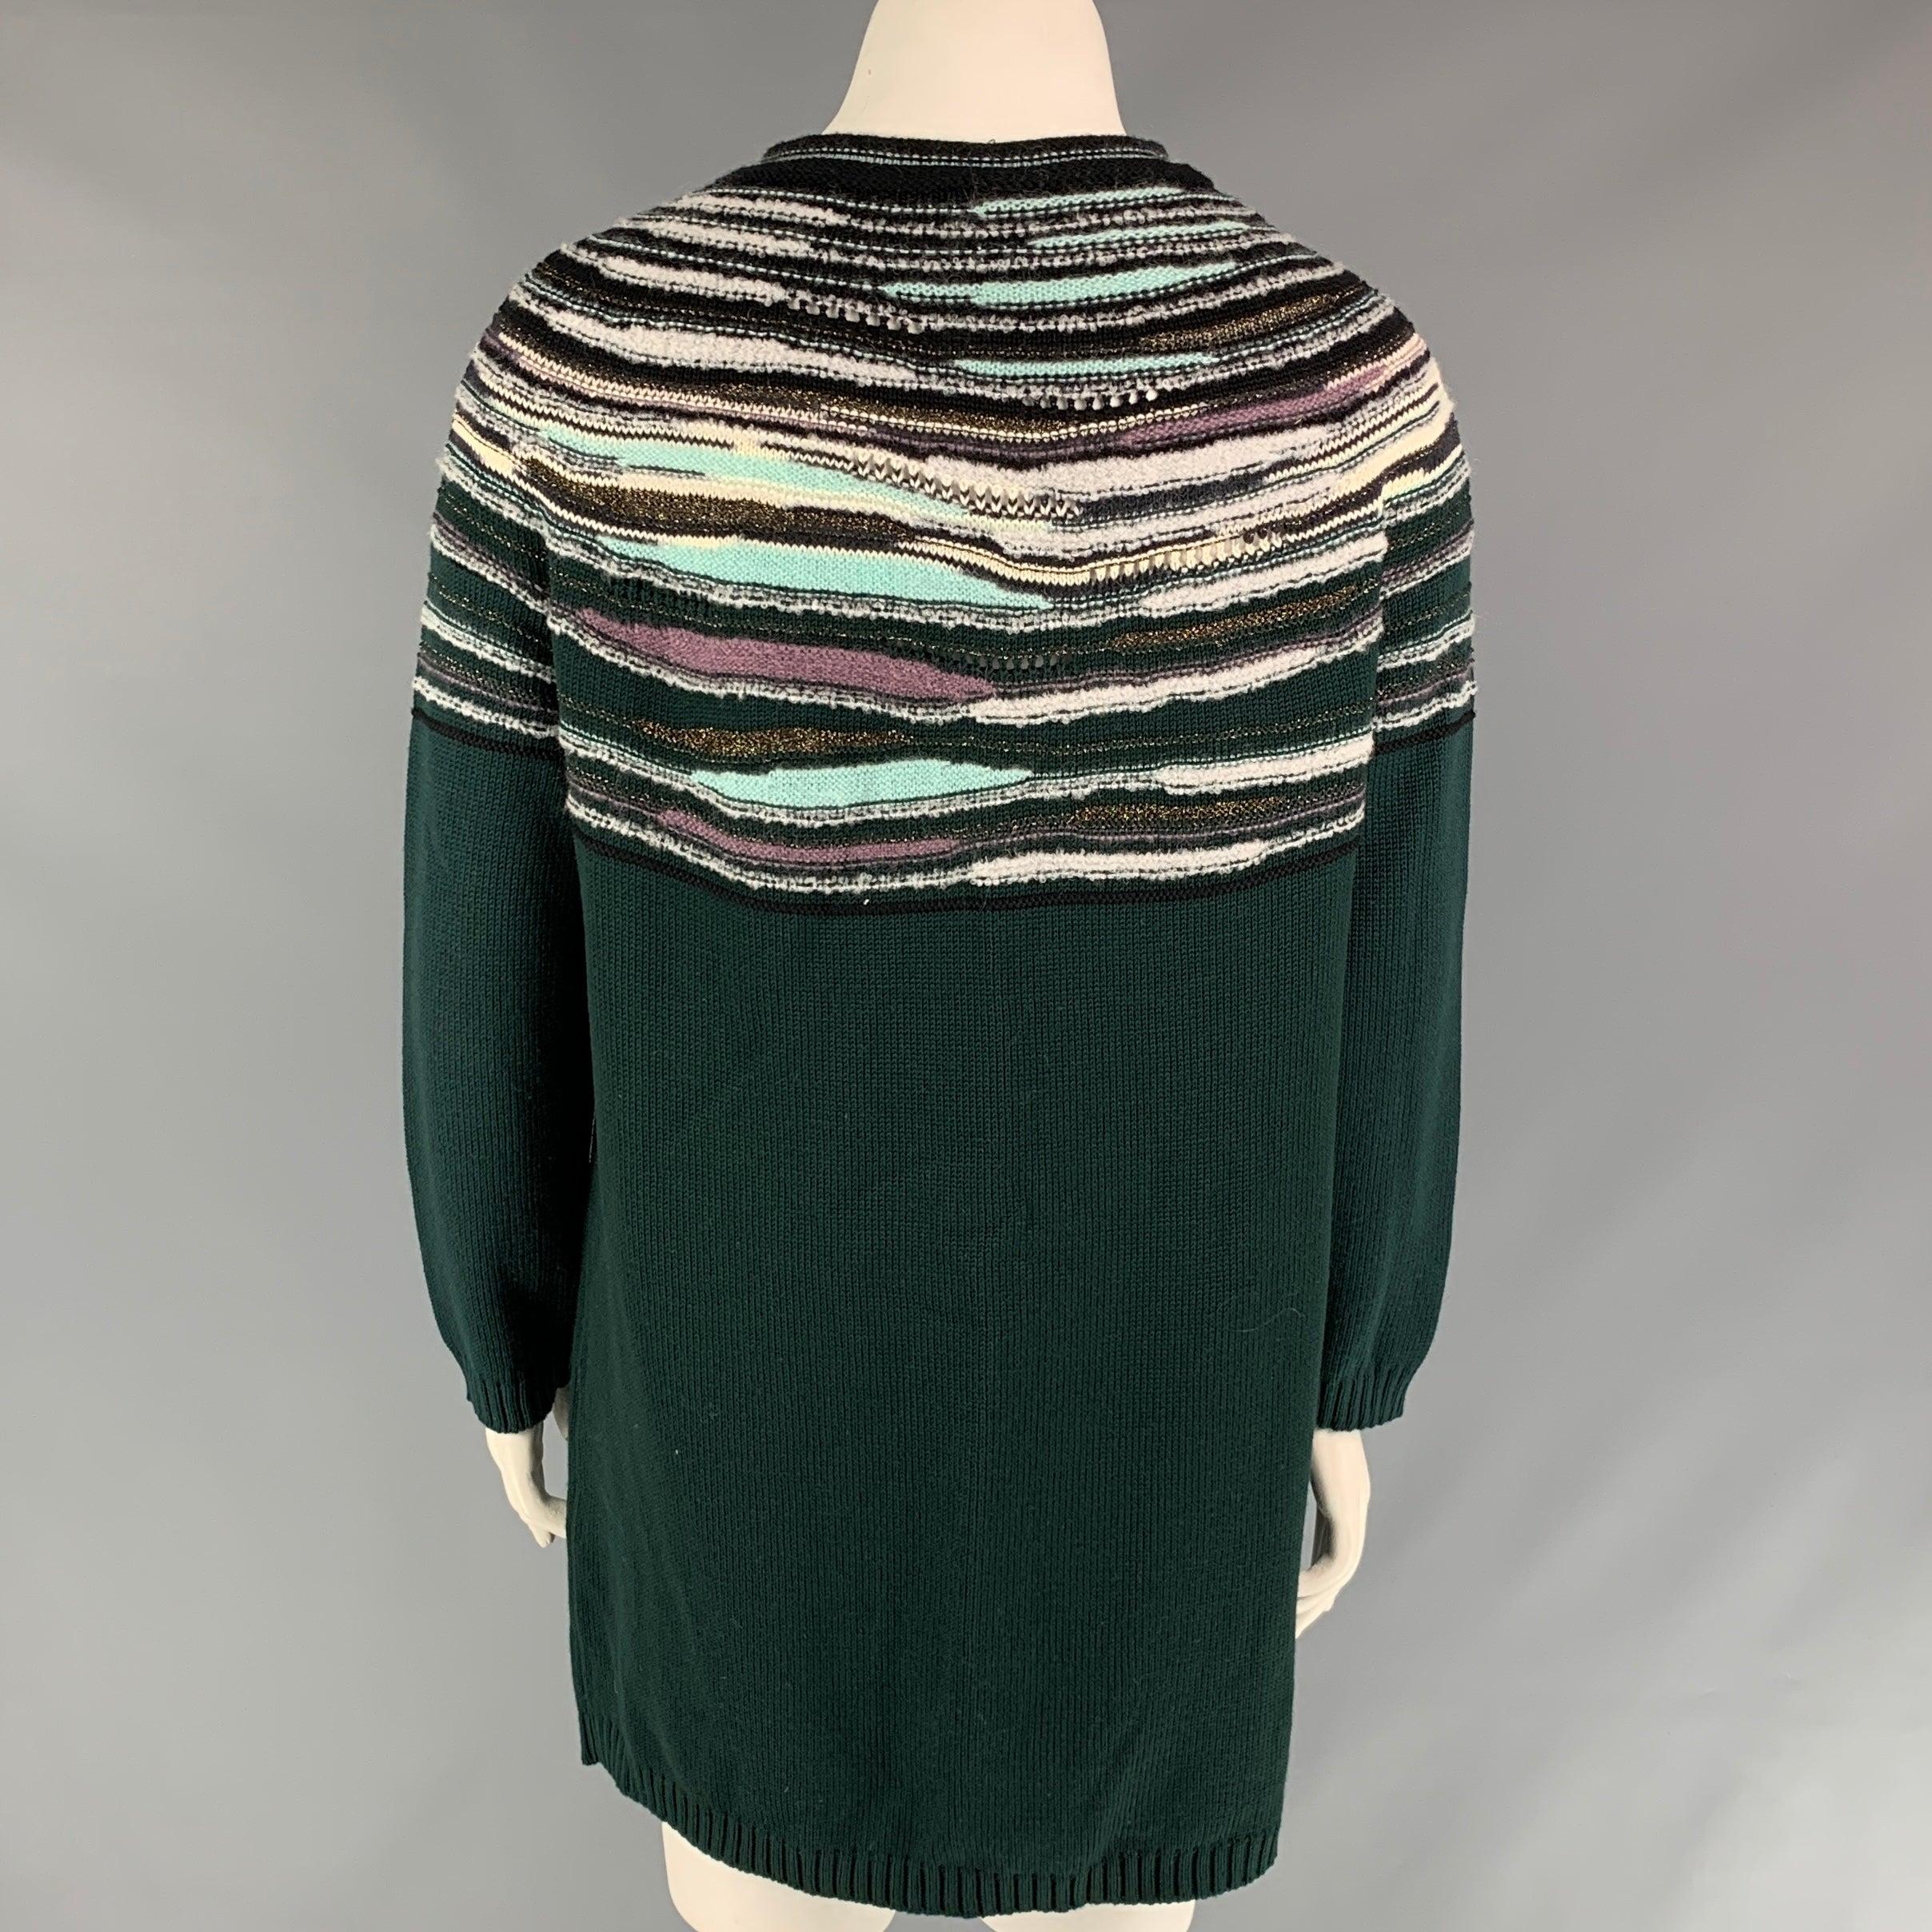 M MISSONI Size 12 Multi-Color Knitted Wool Blend Green Sweater In Good Condition For Sale In San Francisco, CA